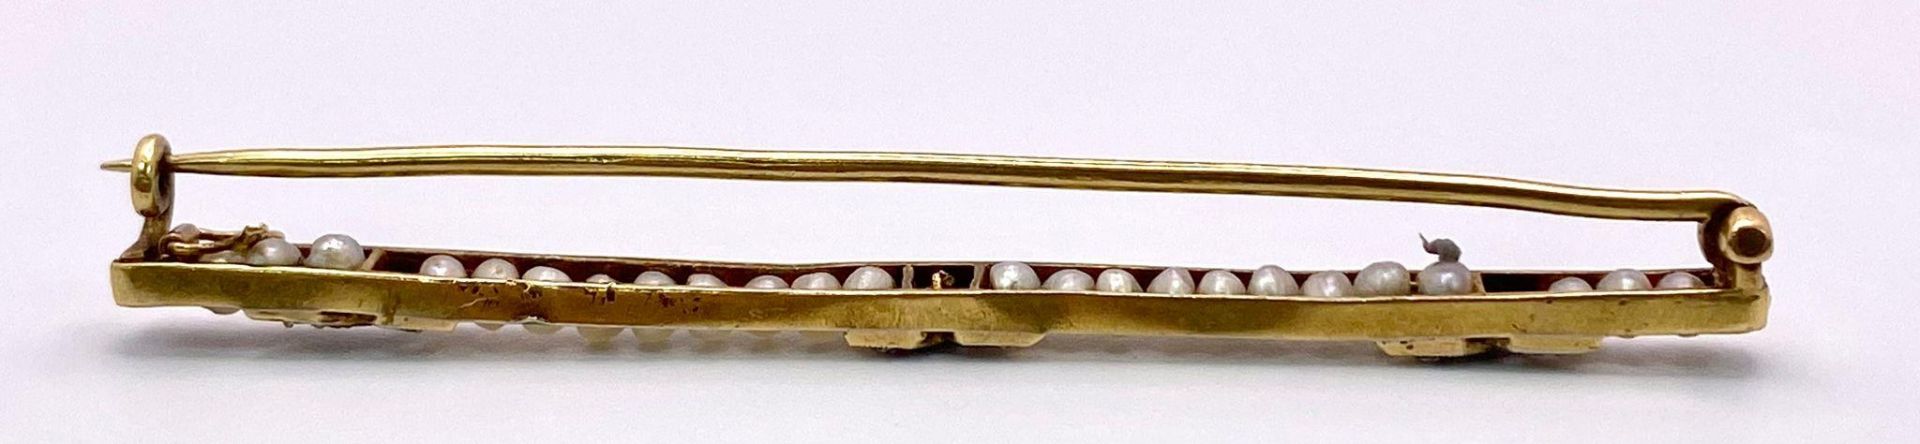 An Antique Mid-Karat Gold, Pearl and Diamond Bar Brooch. 6.5cm length. 5.24g total weight. - Image 4 of 4